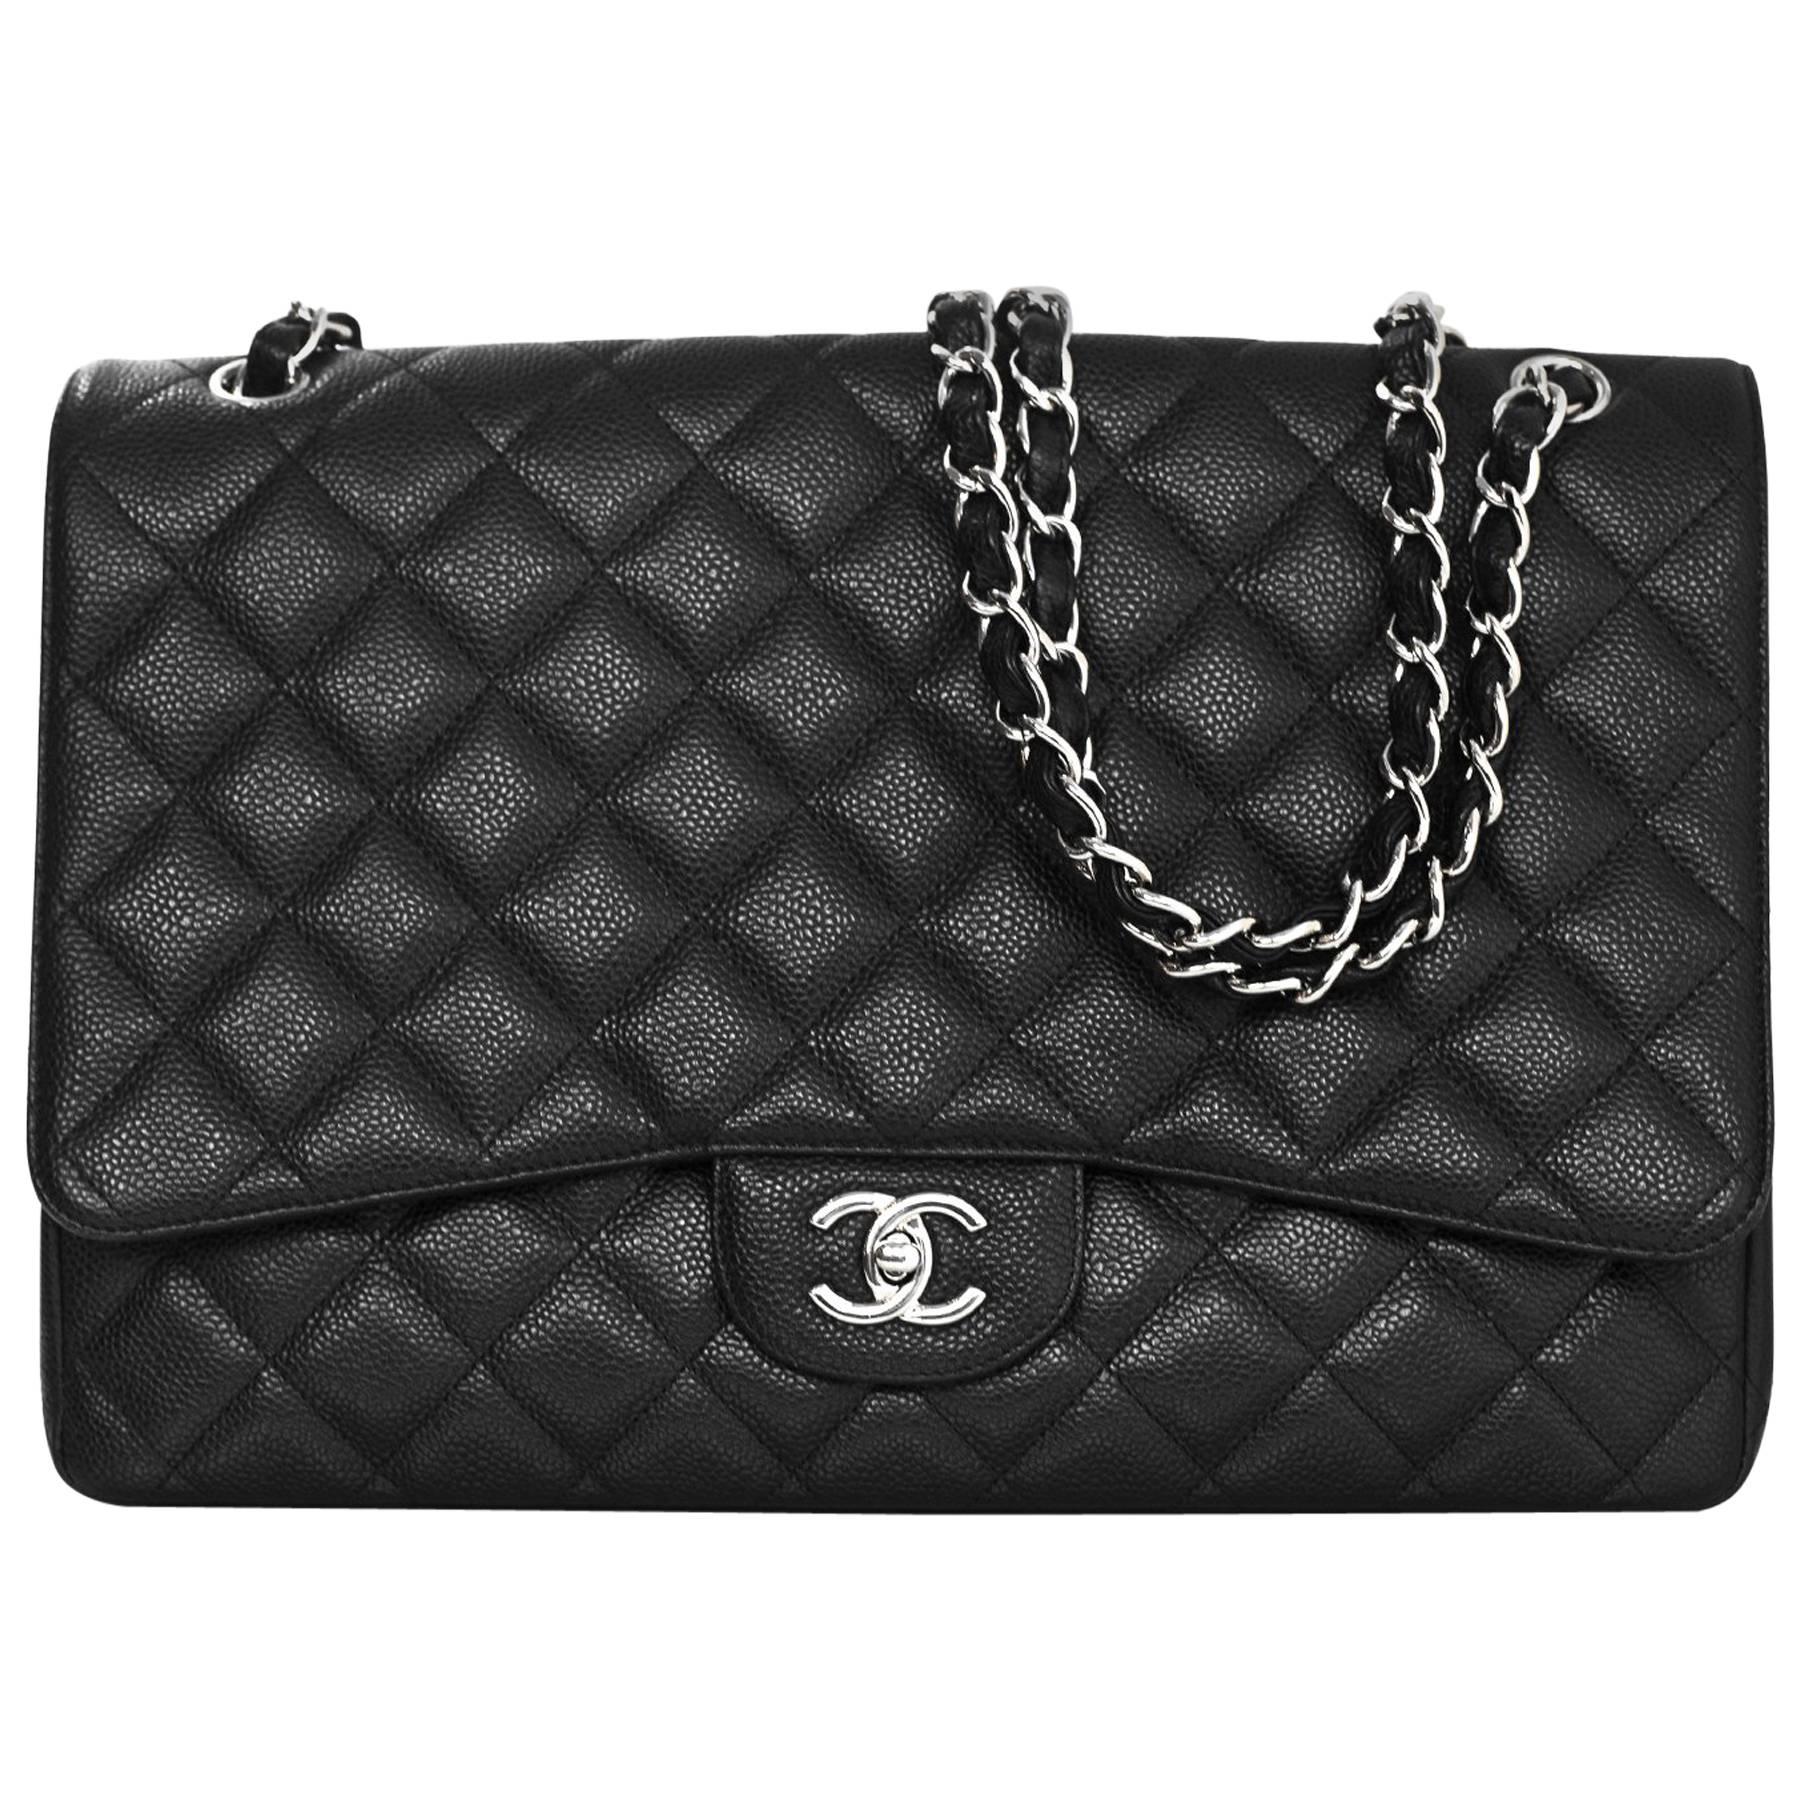 Chanel Black Caviar Leather Quilted Single Flap Maxi Classic Bag with DB